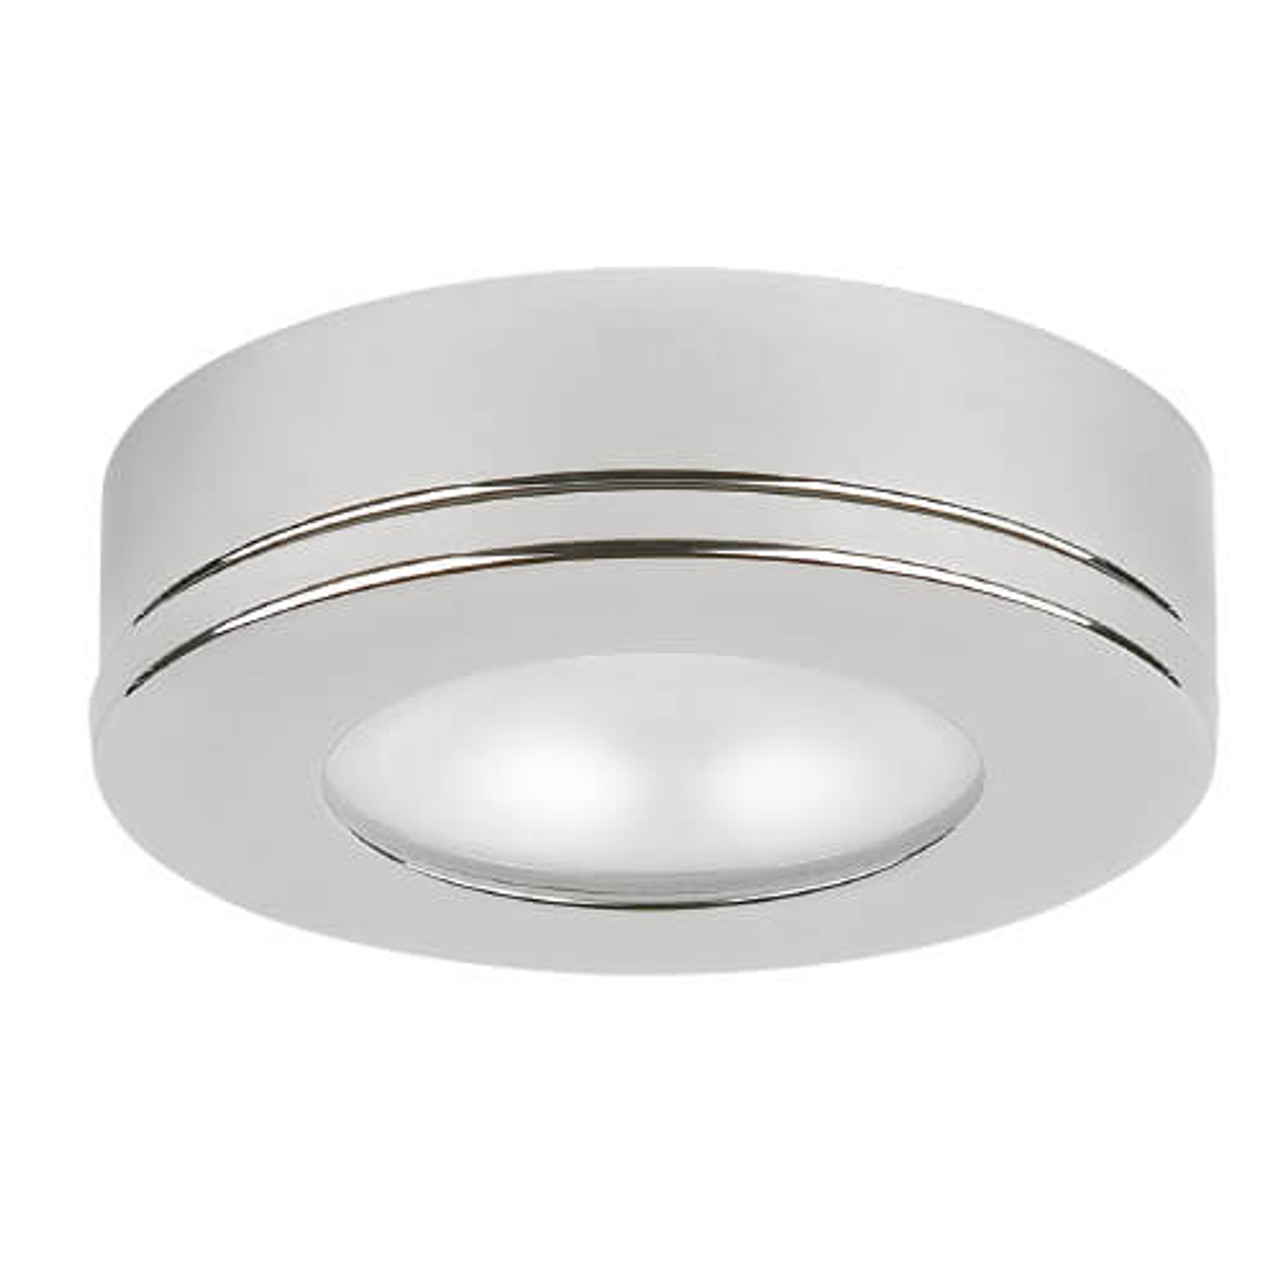 Imtra - Tide PowerLED Downlight - 10-40VDC, Polished Stainless Steel, Warm White/Red, 3.2W, IP40 (ILIM57301) - Apollo Lighting